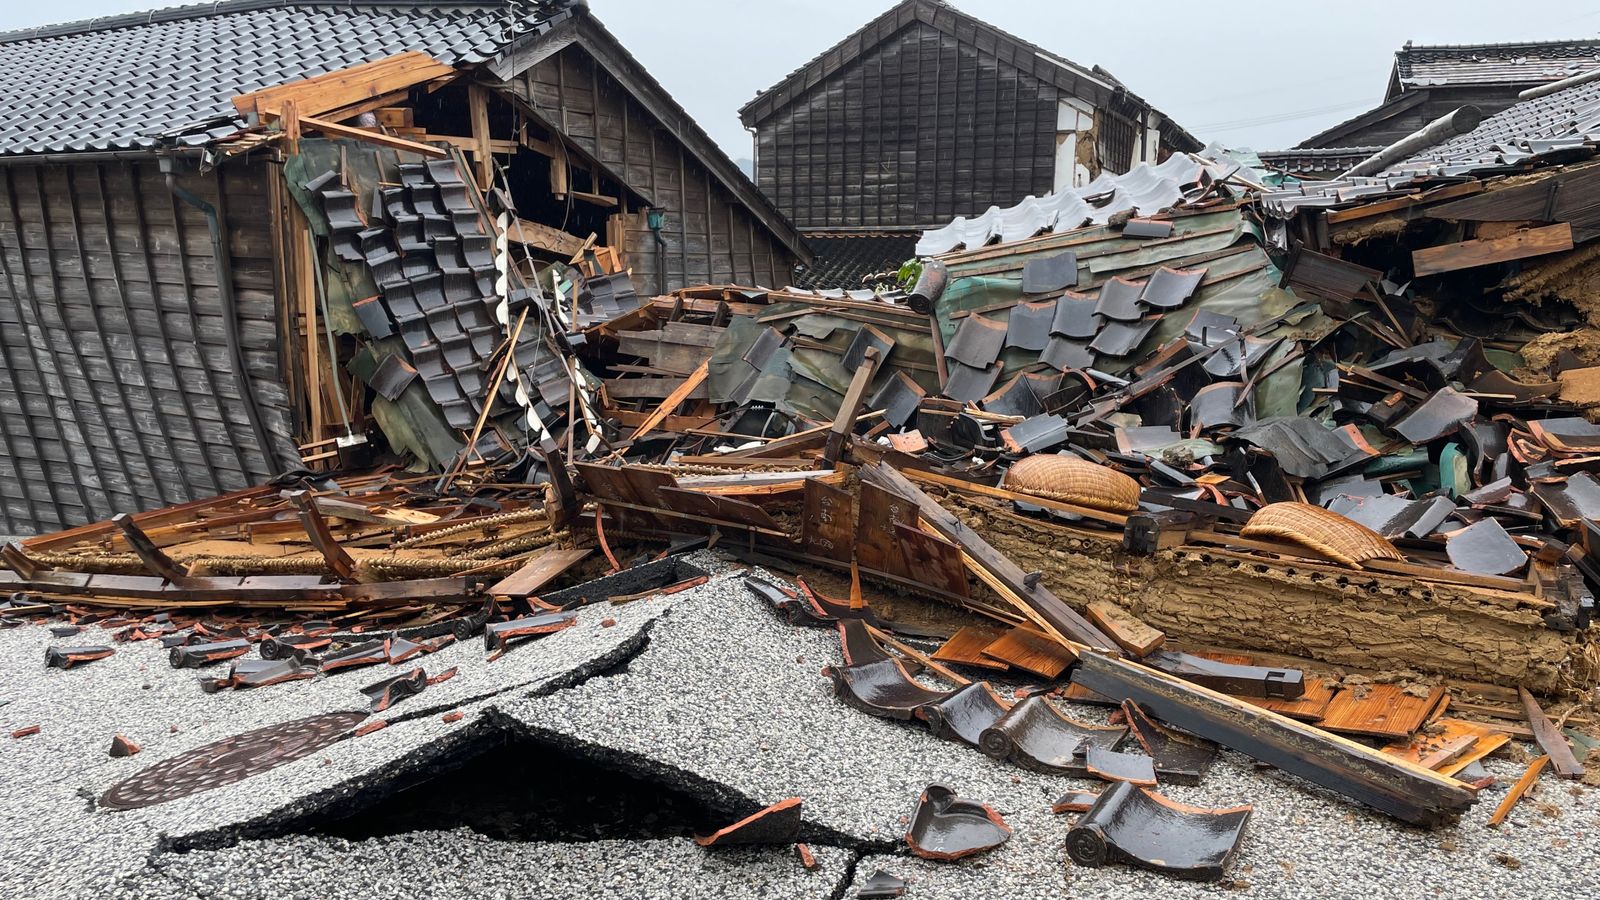 'It will take years to rebuild': Villagers pick up the pieces after devastating Japan earthquake